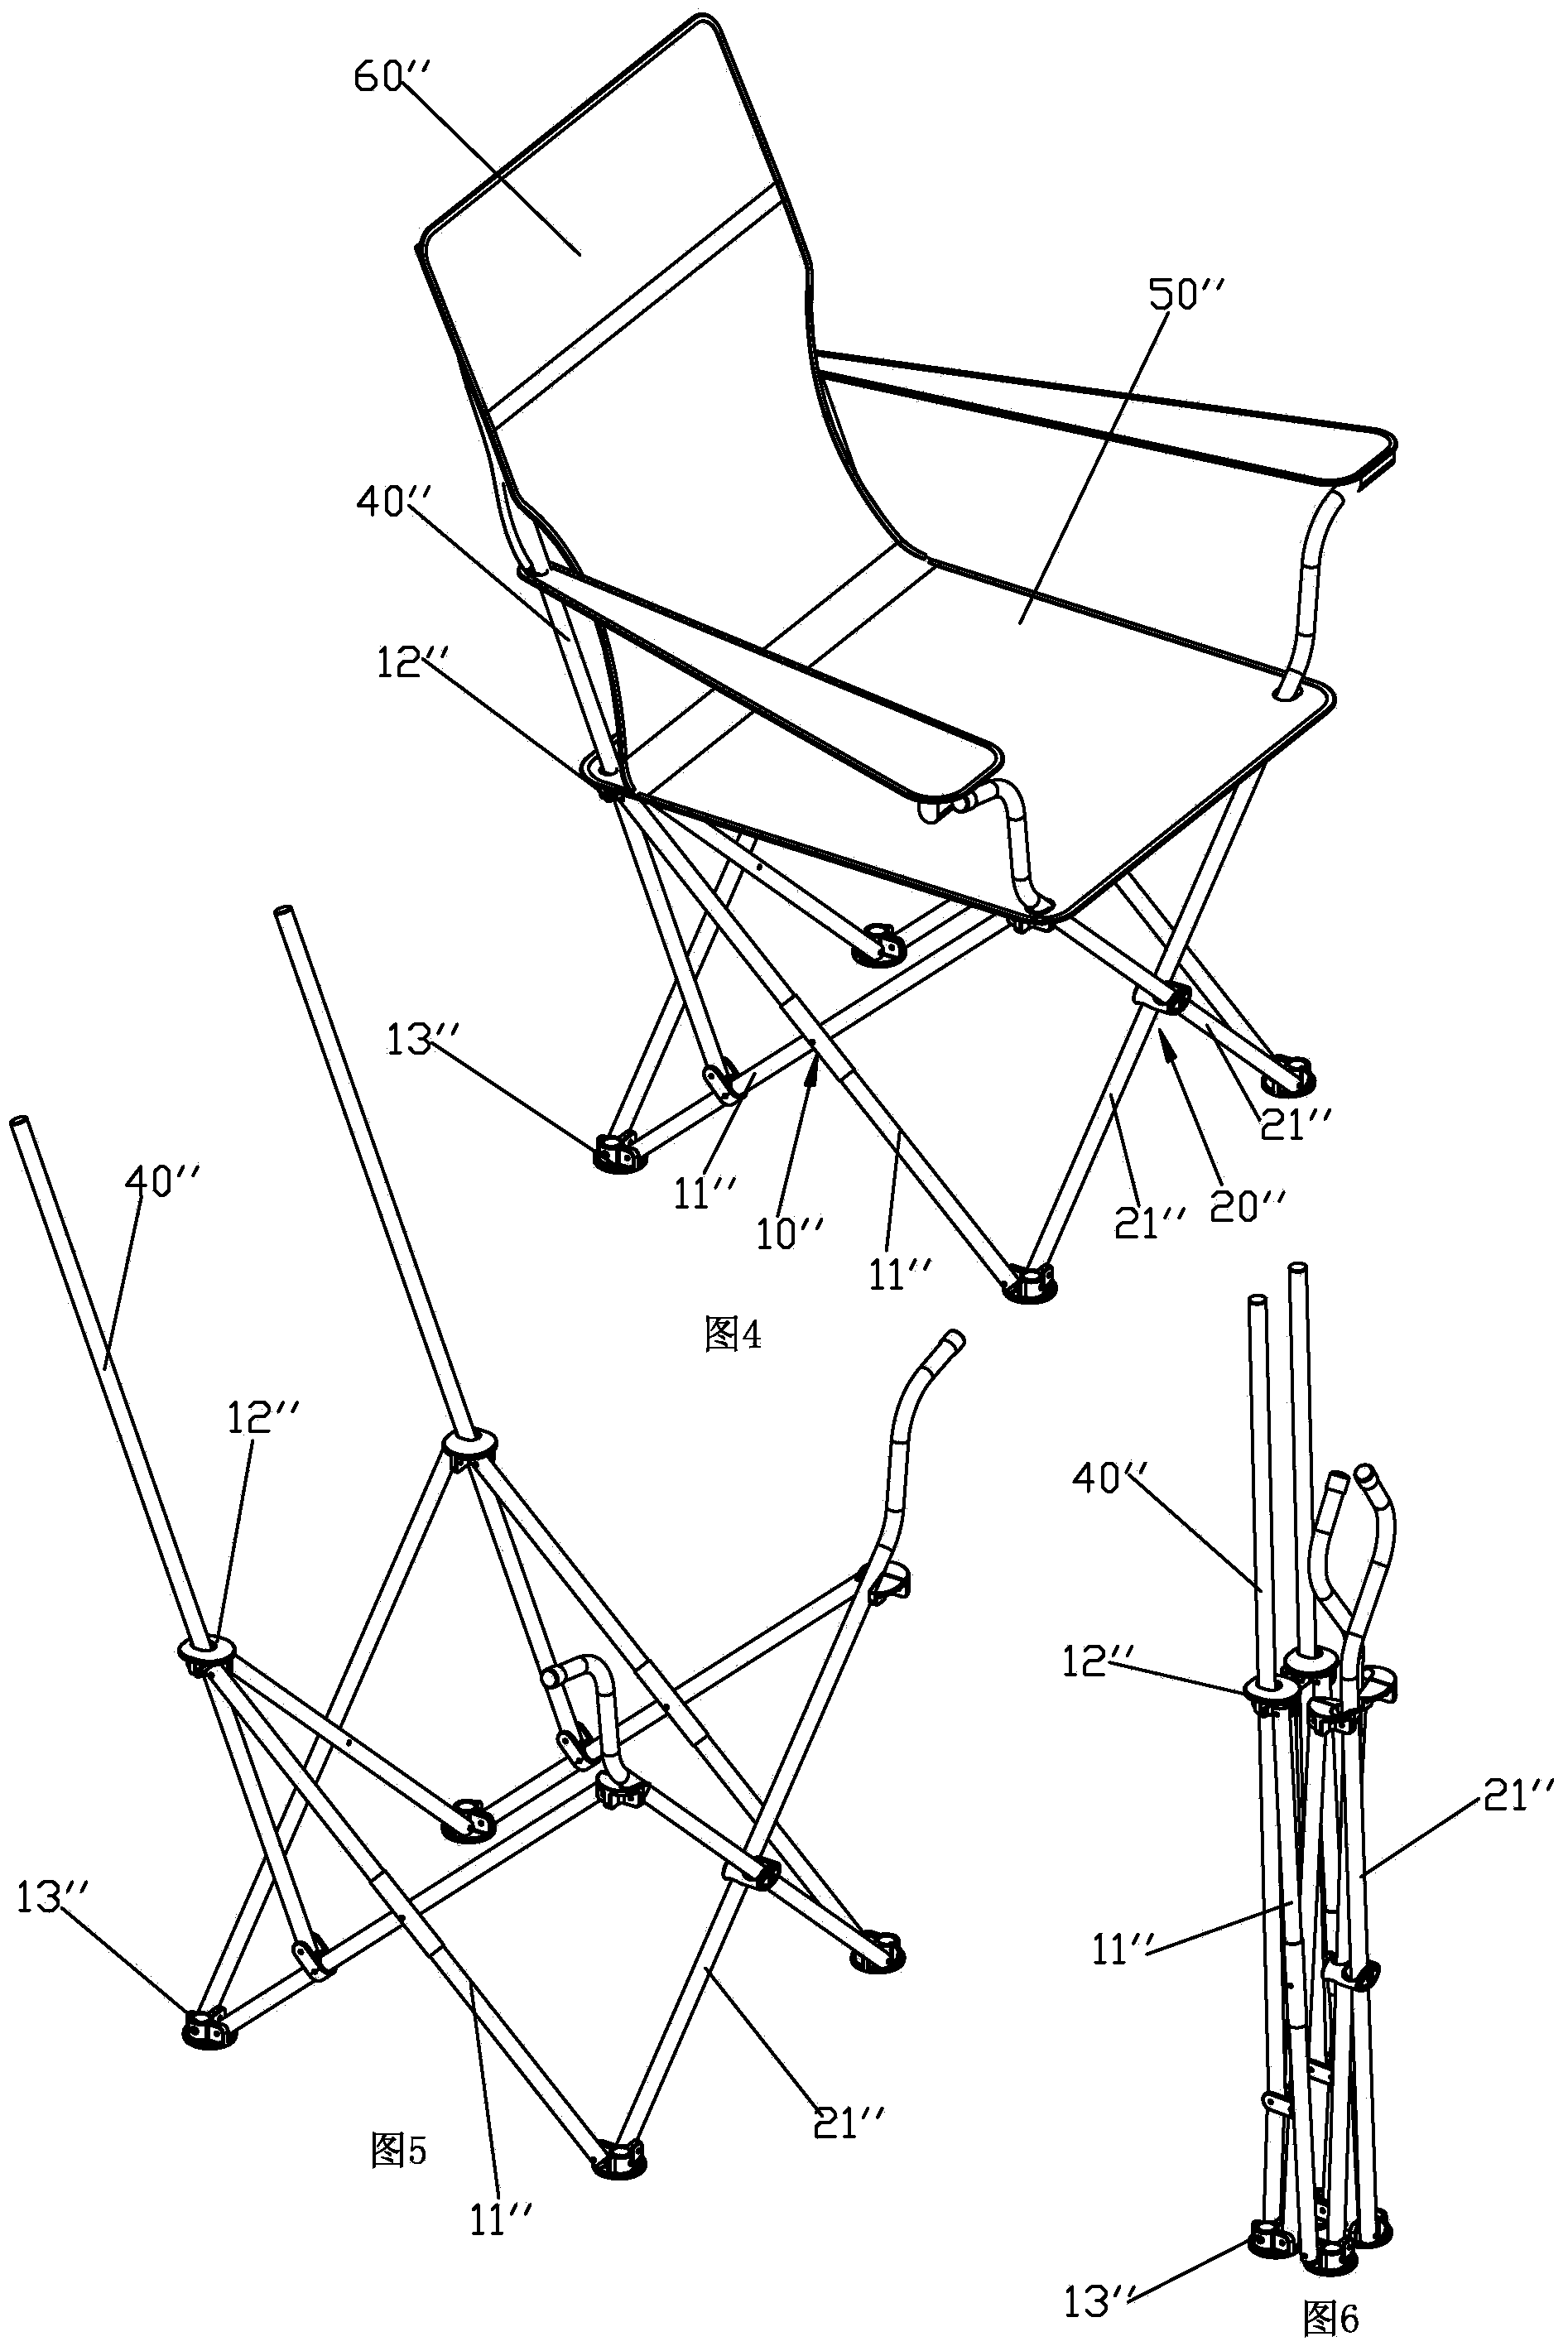 Folding leisure chair frame and leisure chair